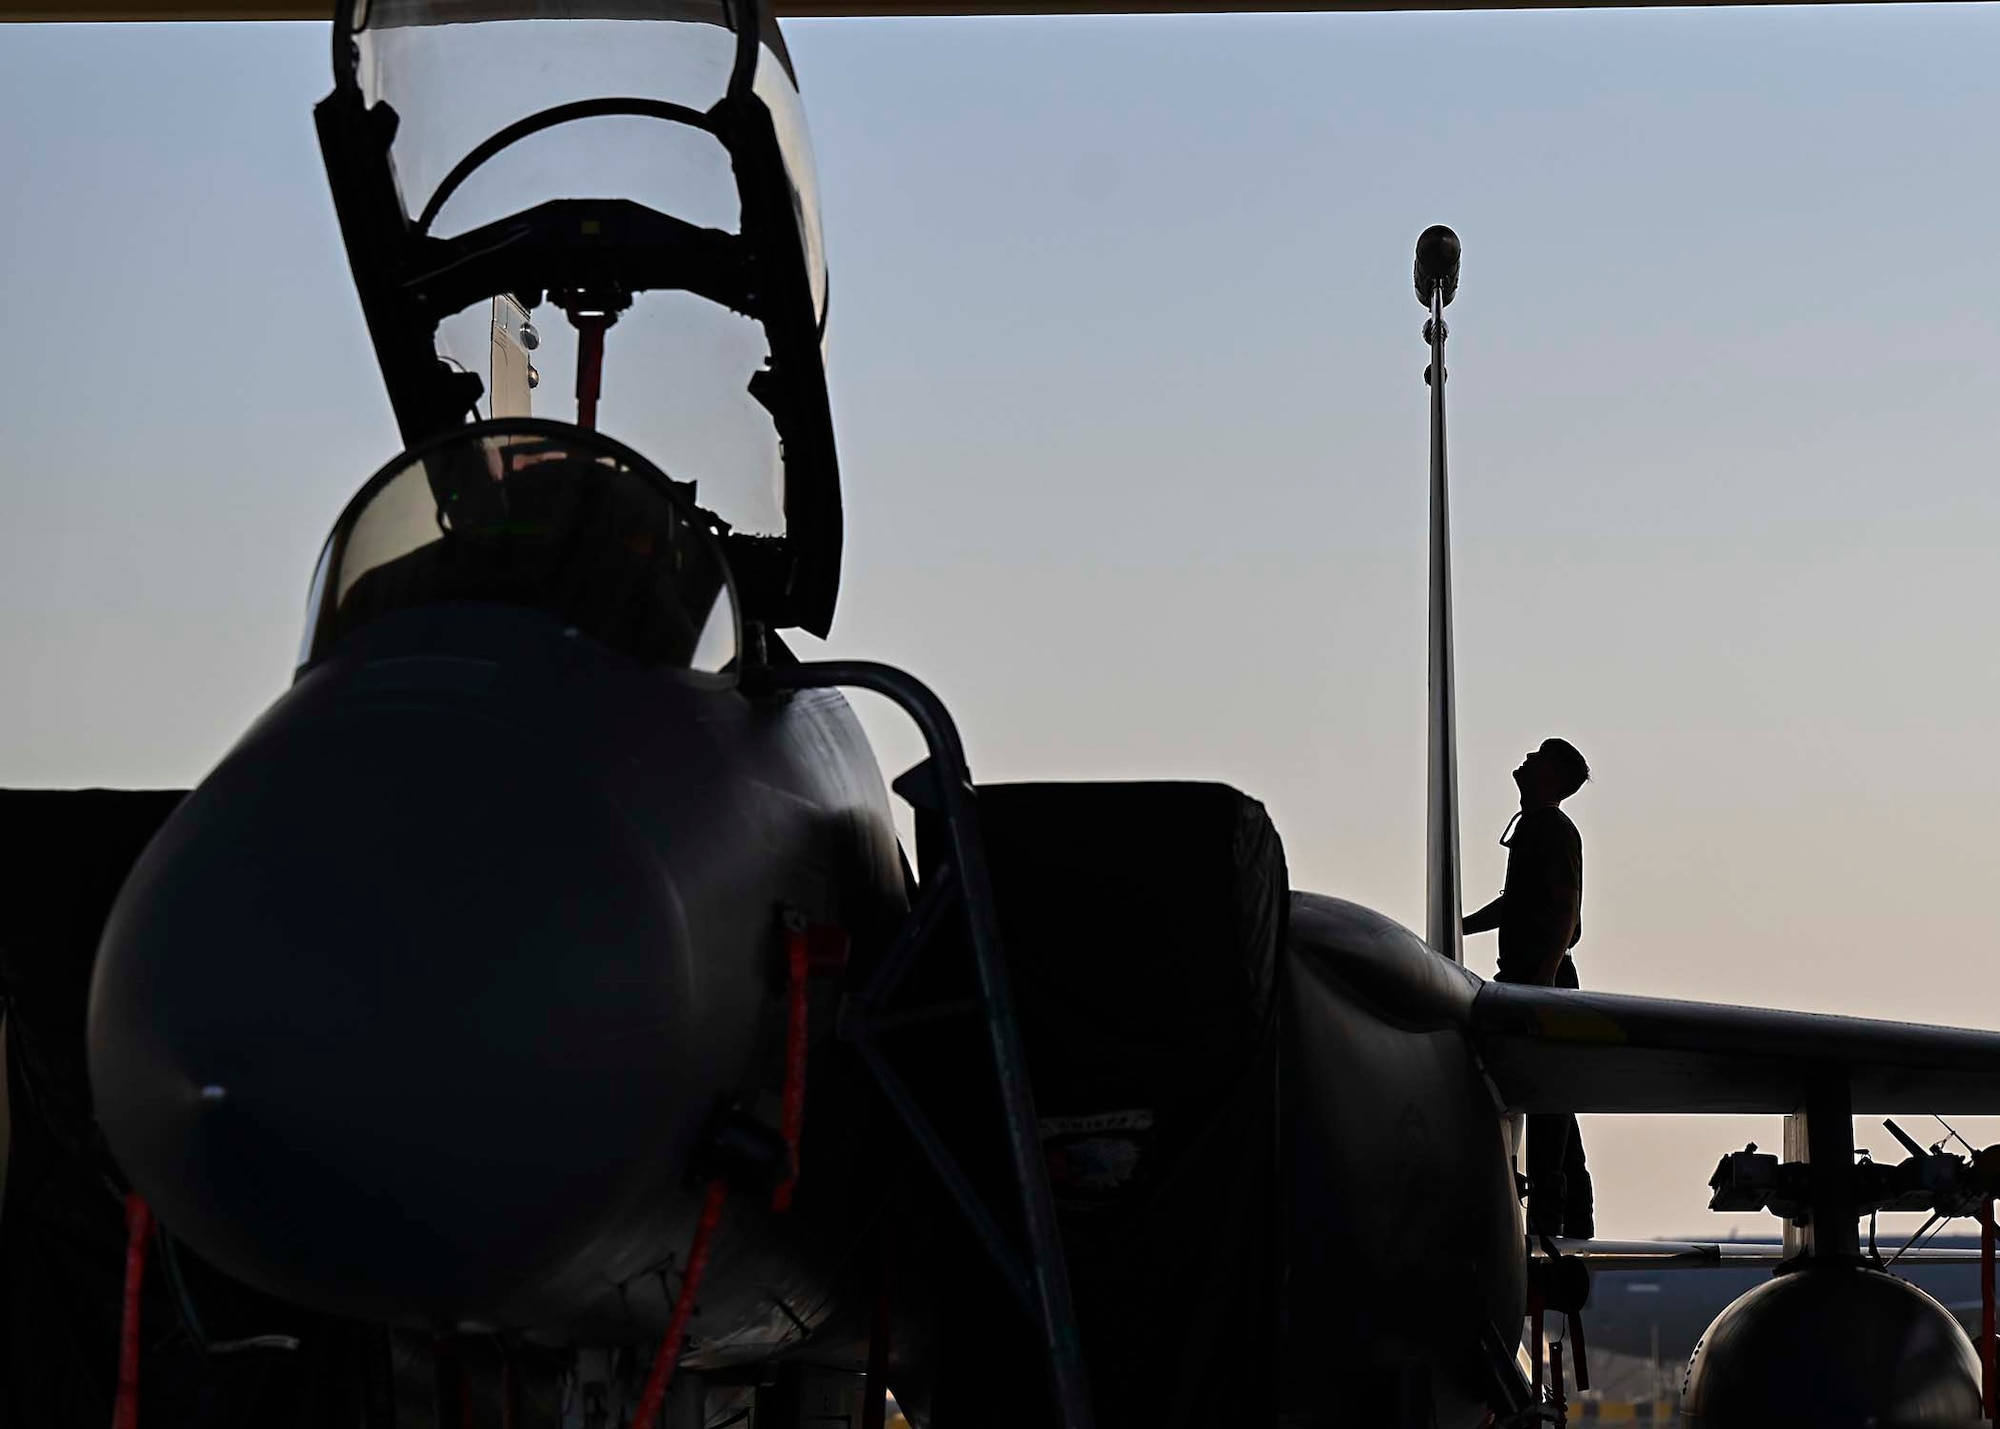 U.S. Air Force Senior Airman Austin Chamberlin, 380th Expeditionary Aircraft Maintenance Squadron F-15E Strike Eagle dedicated crew chief, performs inspections on an F-15E deployed to Al Dhafra Air Base, United Arab Emirates, Jan. 19, 2021.